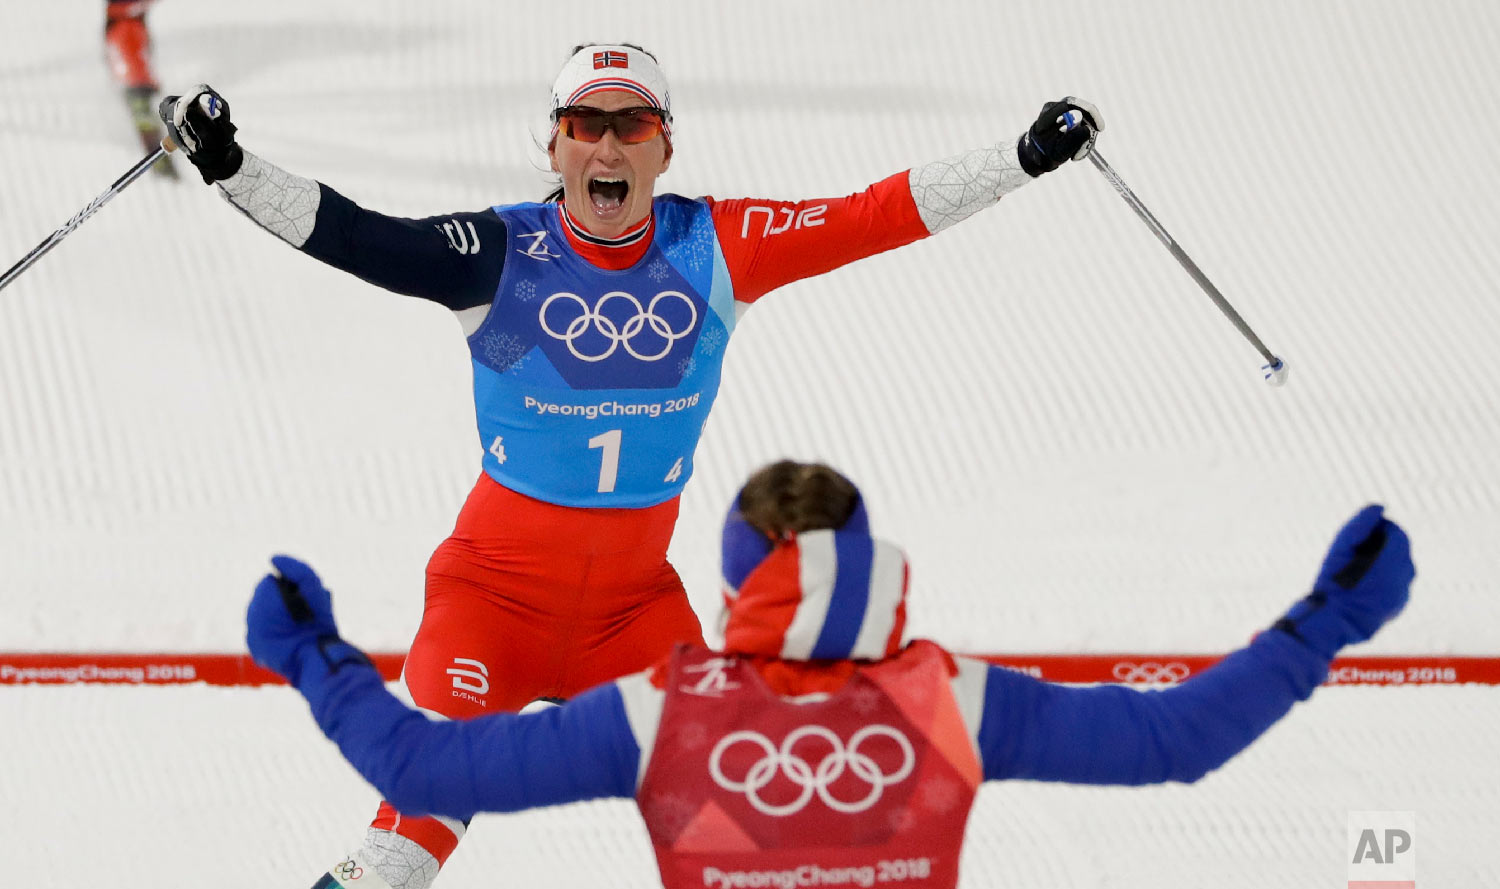  Marit Bjoergen, top, of Norway, celebrates with teammate Ingvild Flugstad Oestberg after winning the women's 4 x 5km relay cross-country skiing competition at the 2018 Winter Olympics in Pyeongchang, South Korea, on Feb. 17, 2018. (AP Photo/Kirsty W